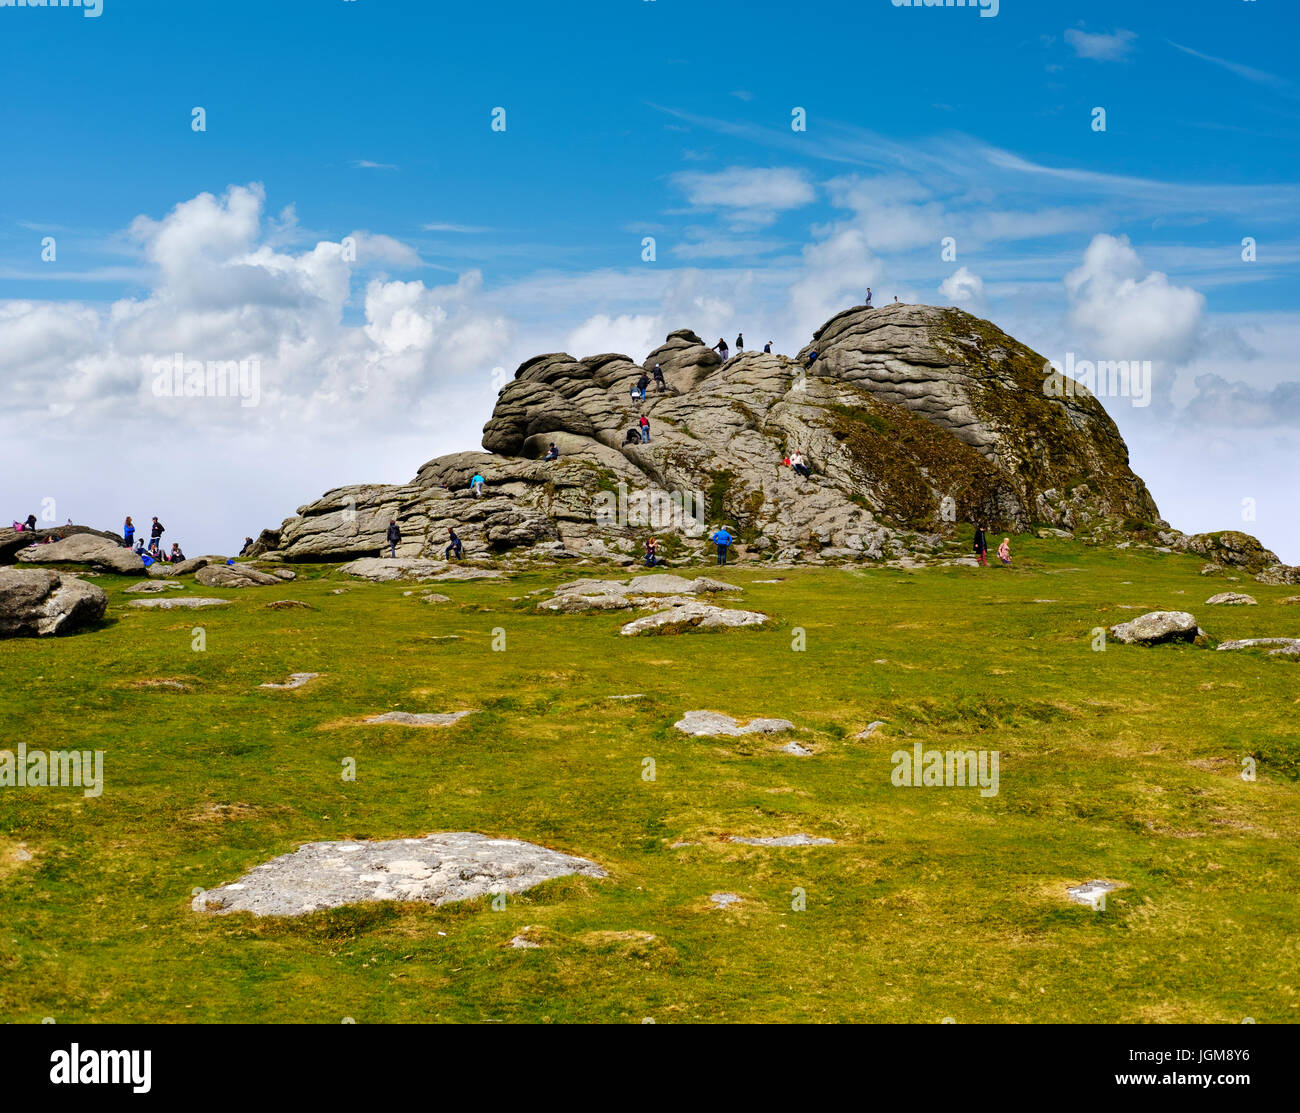 Haytor Rocks High Resolution Stock Photography and Images - Alamy